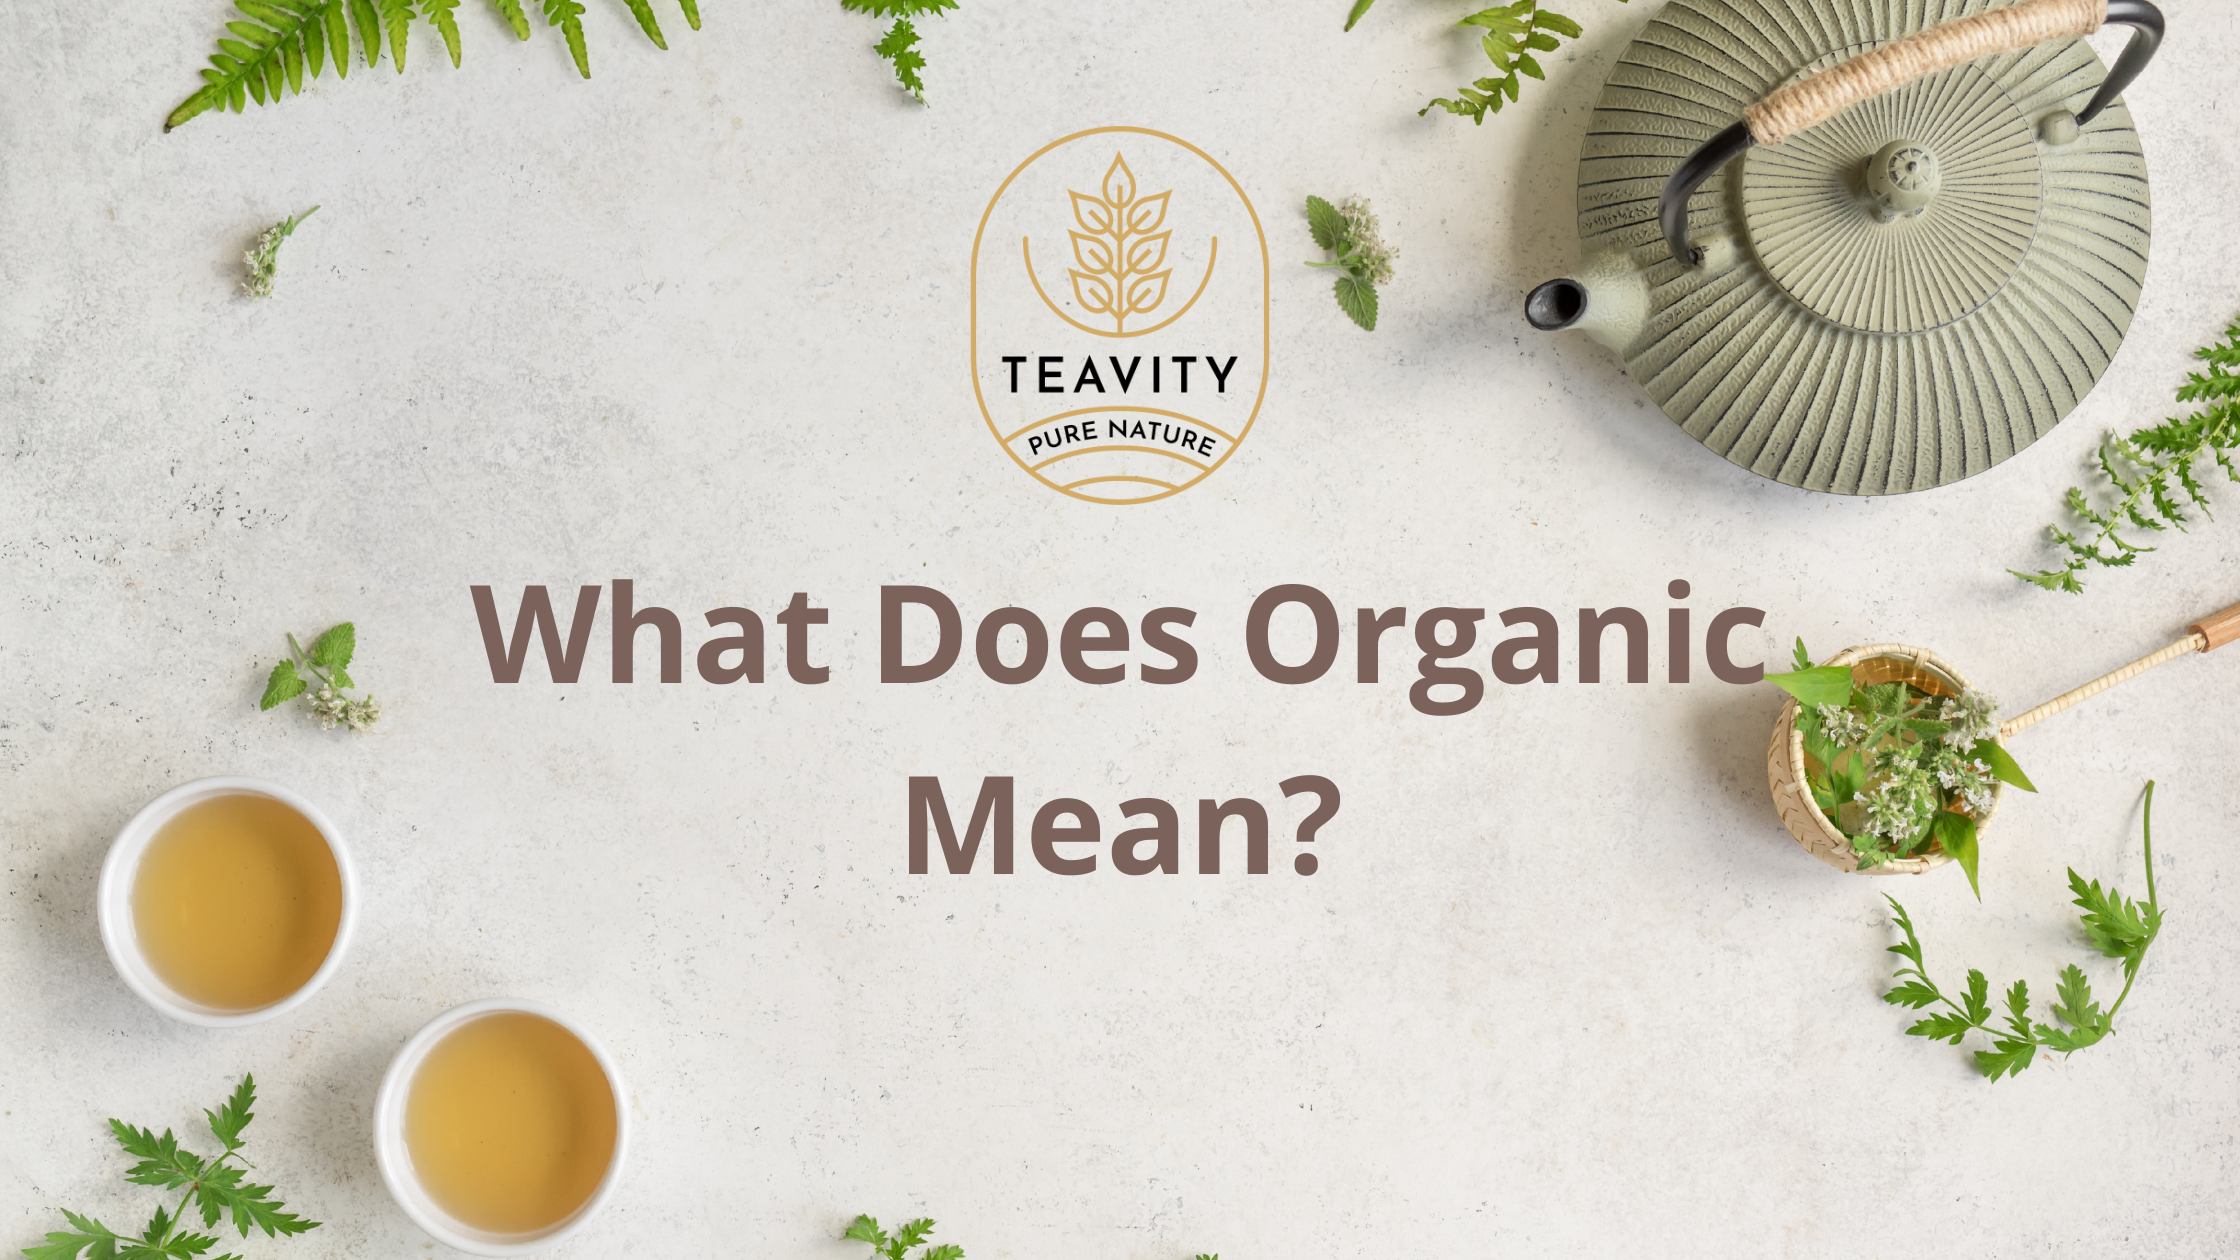 What does Organic Mean?